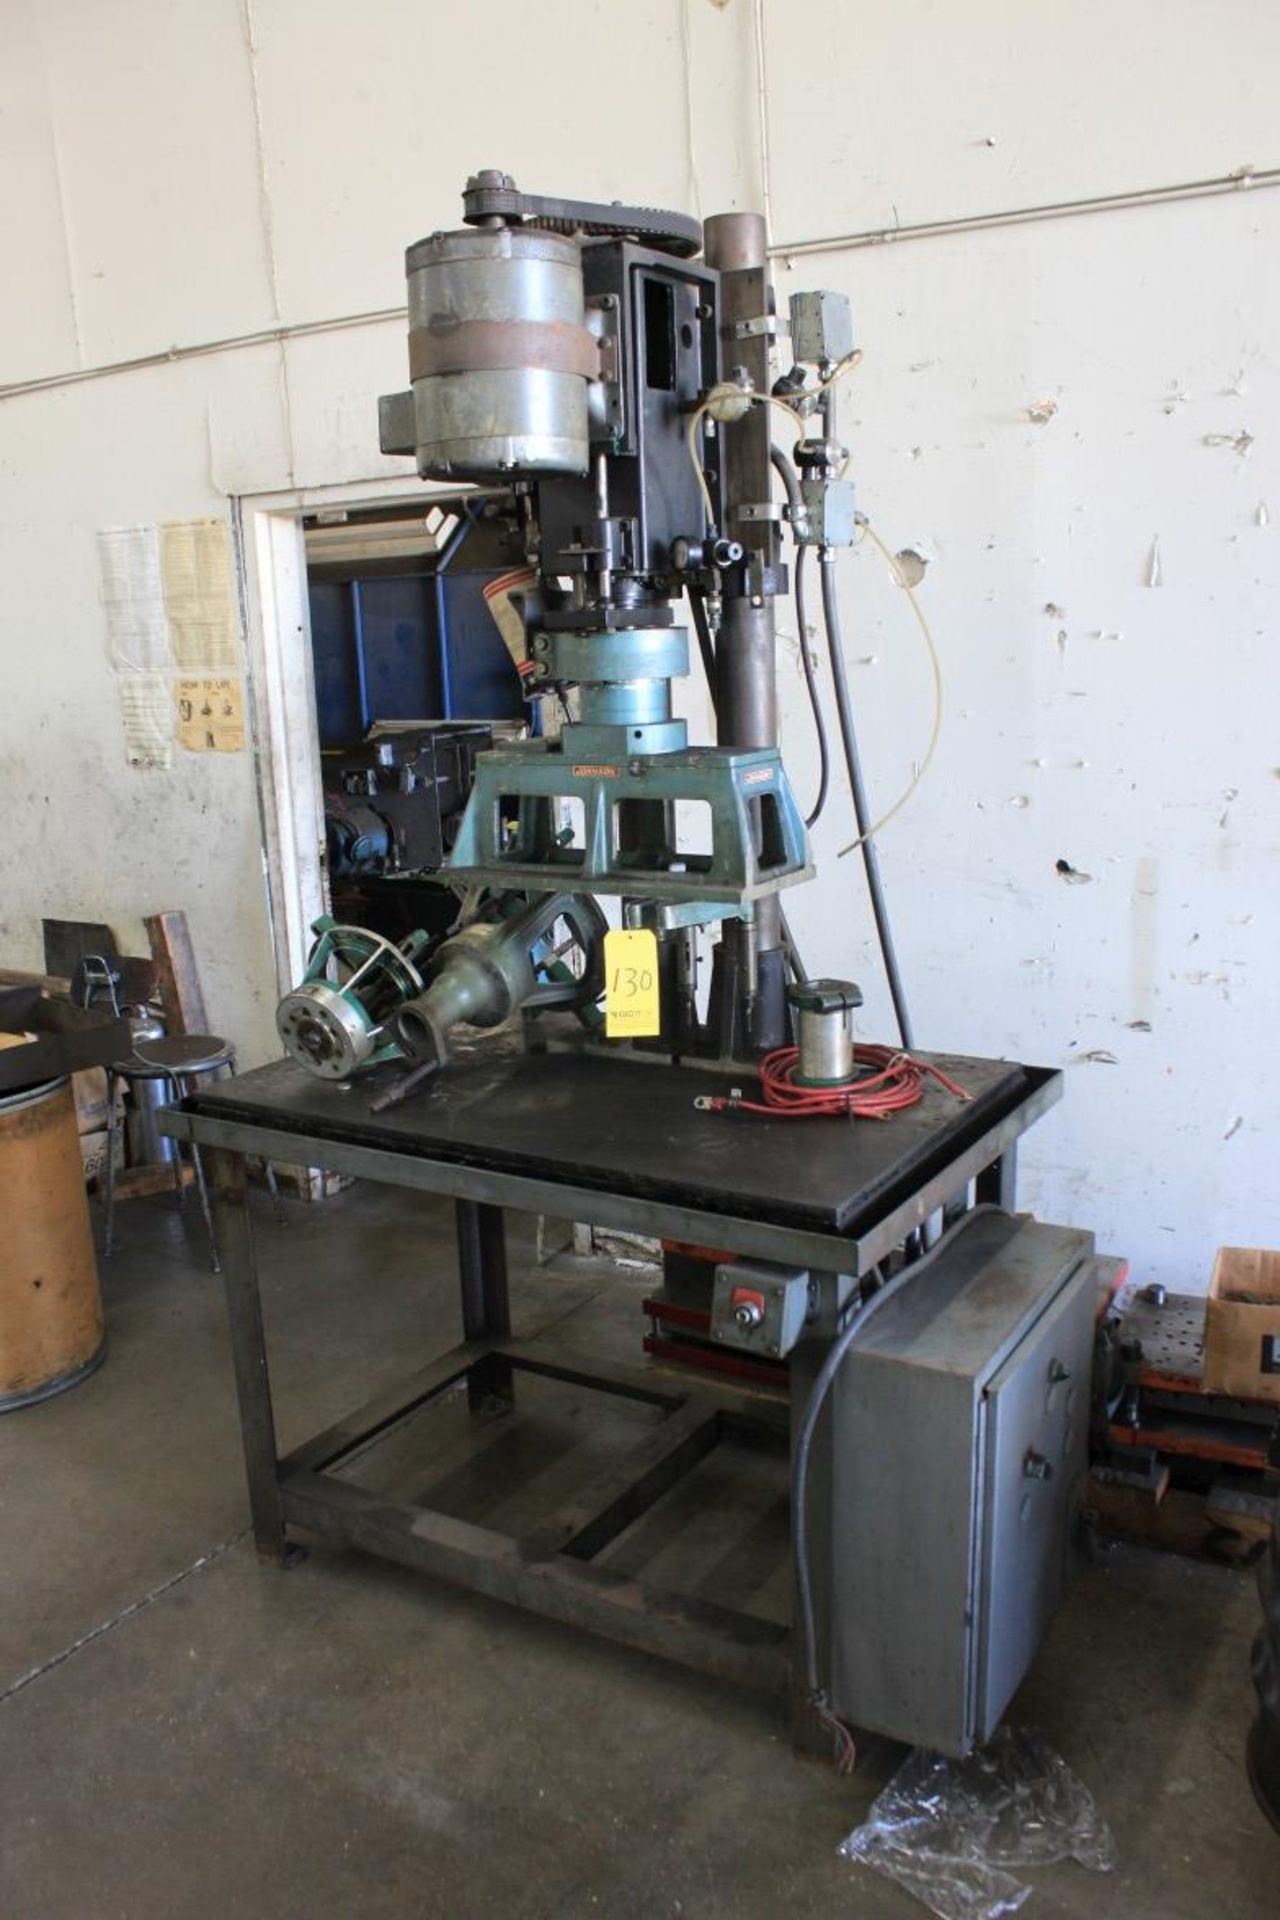 Drill-N-Tap Machine, Table Size: 48'' L to R, 30'' F to B, Overall Machine Height: 93'', Comes w/